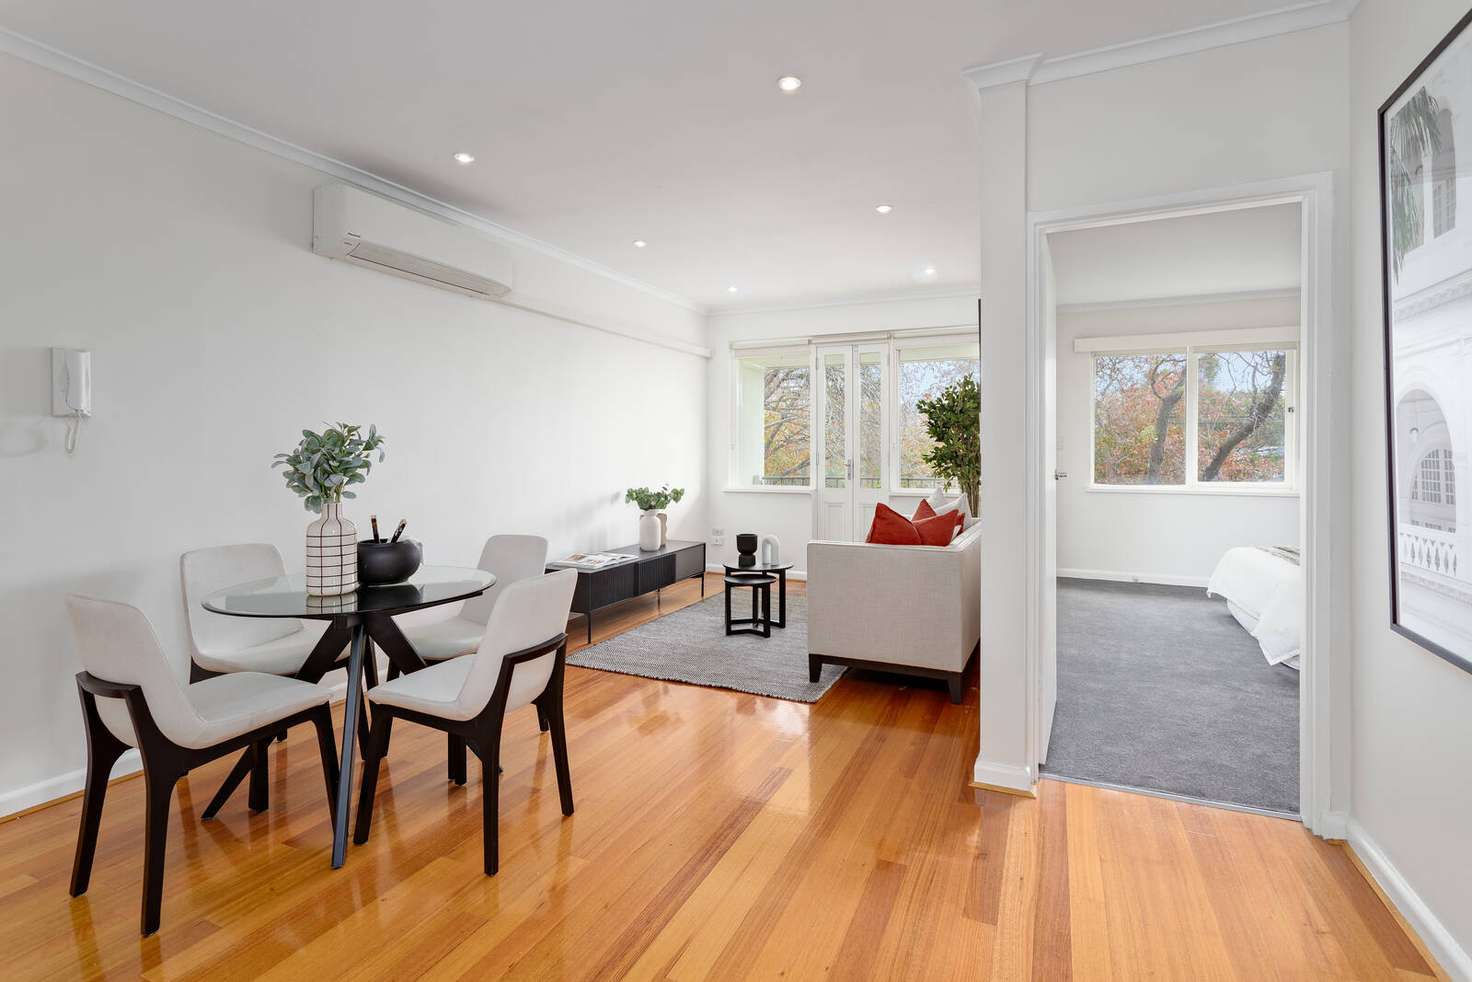 Main view of Homely apartment listing, 4/82 Paxton Street, Malvern East VIC 3145